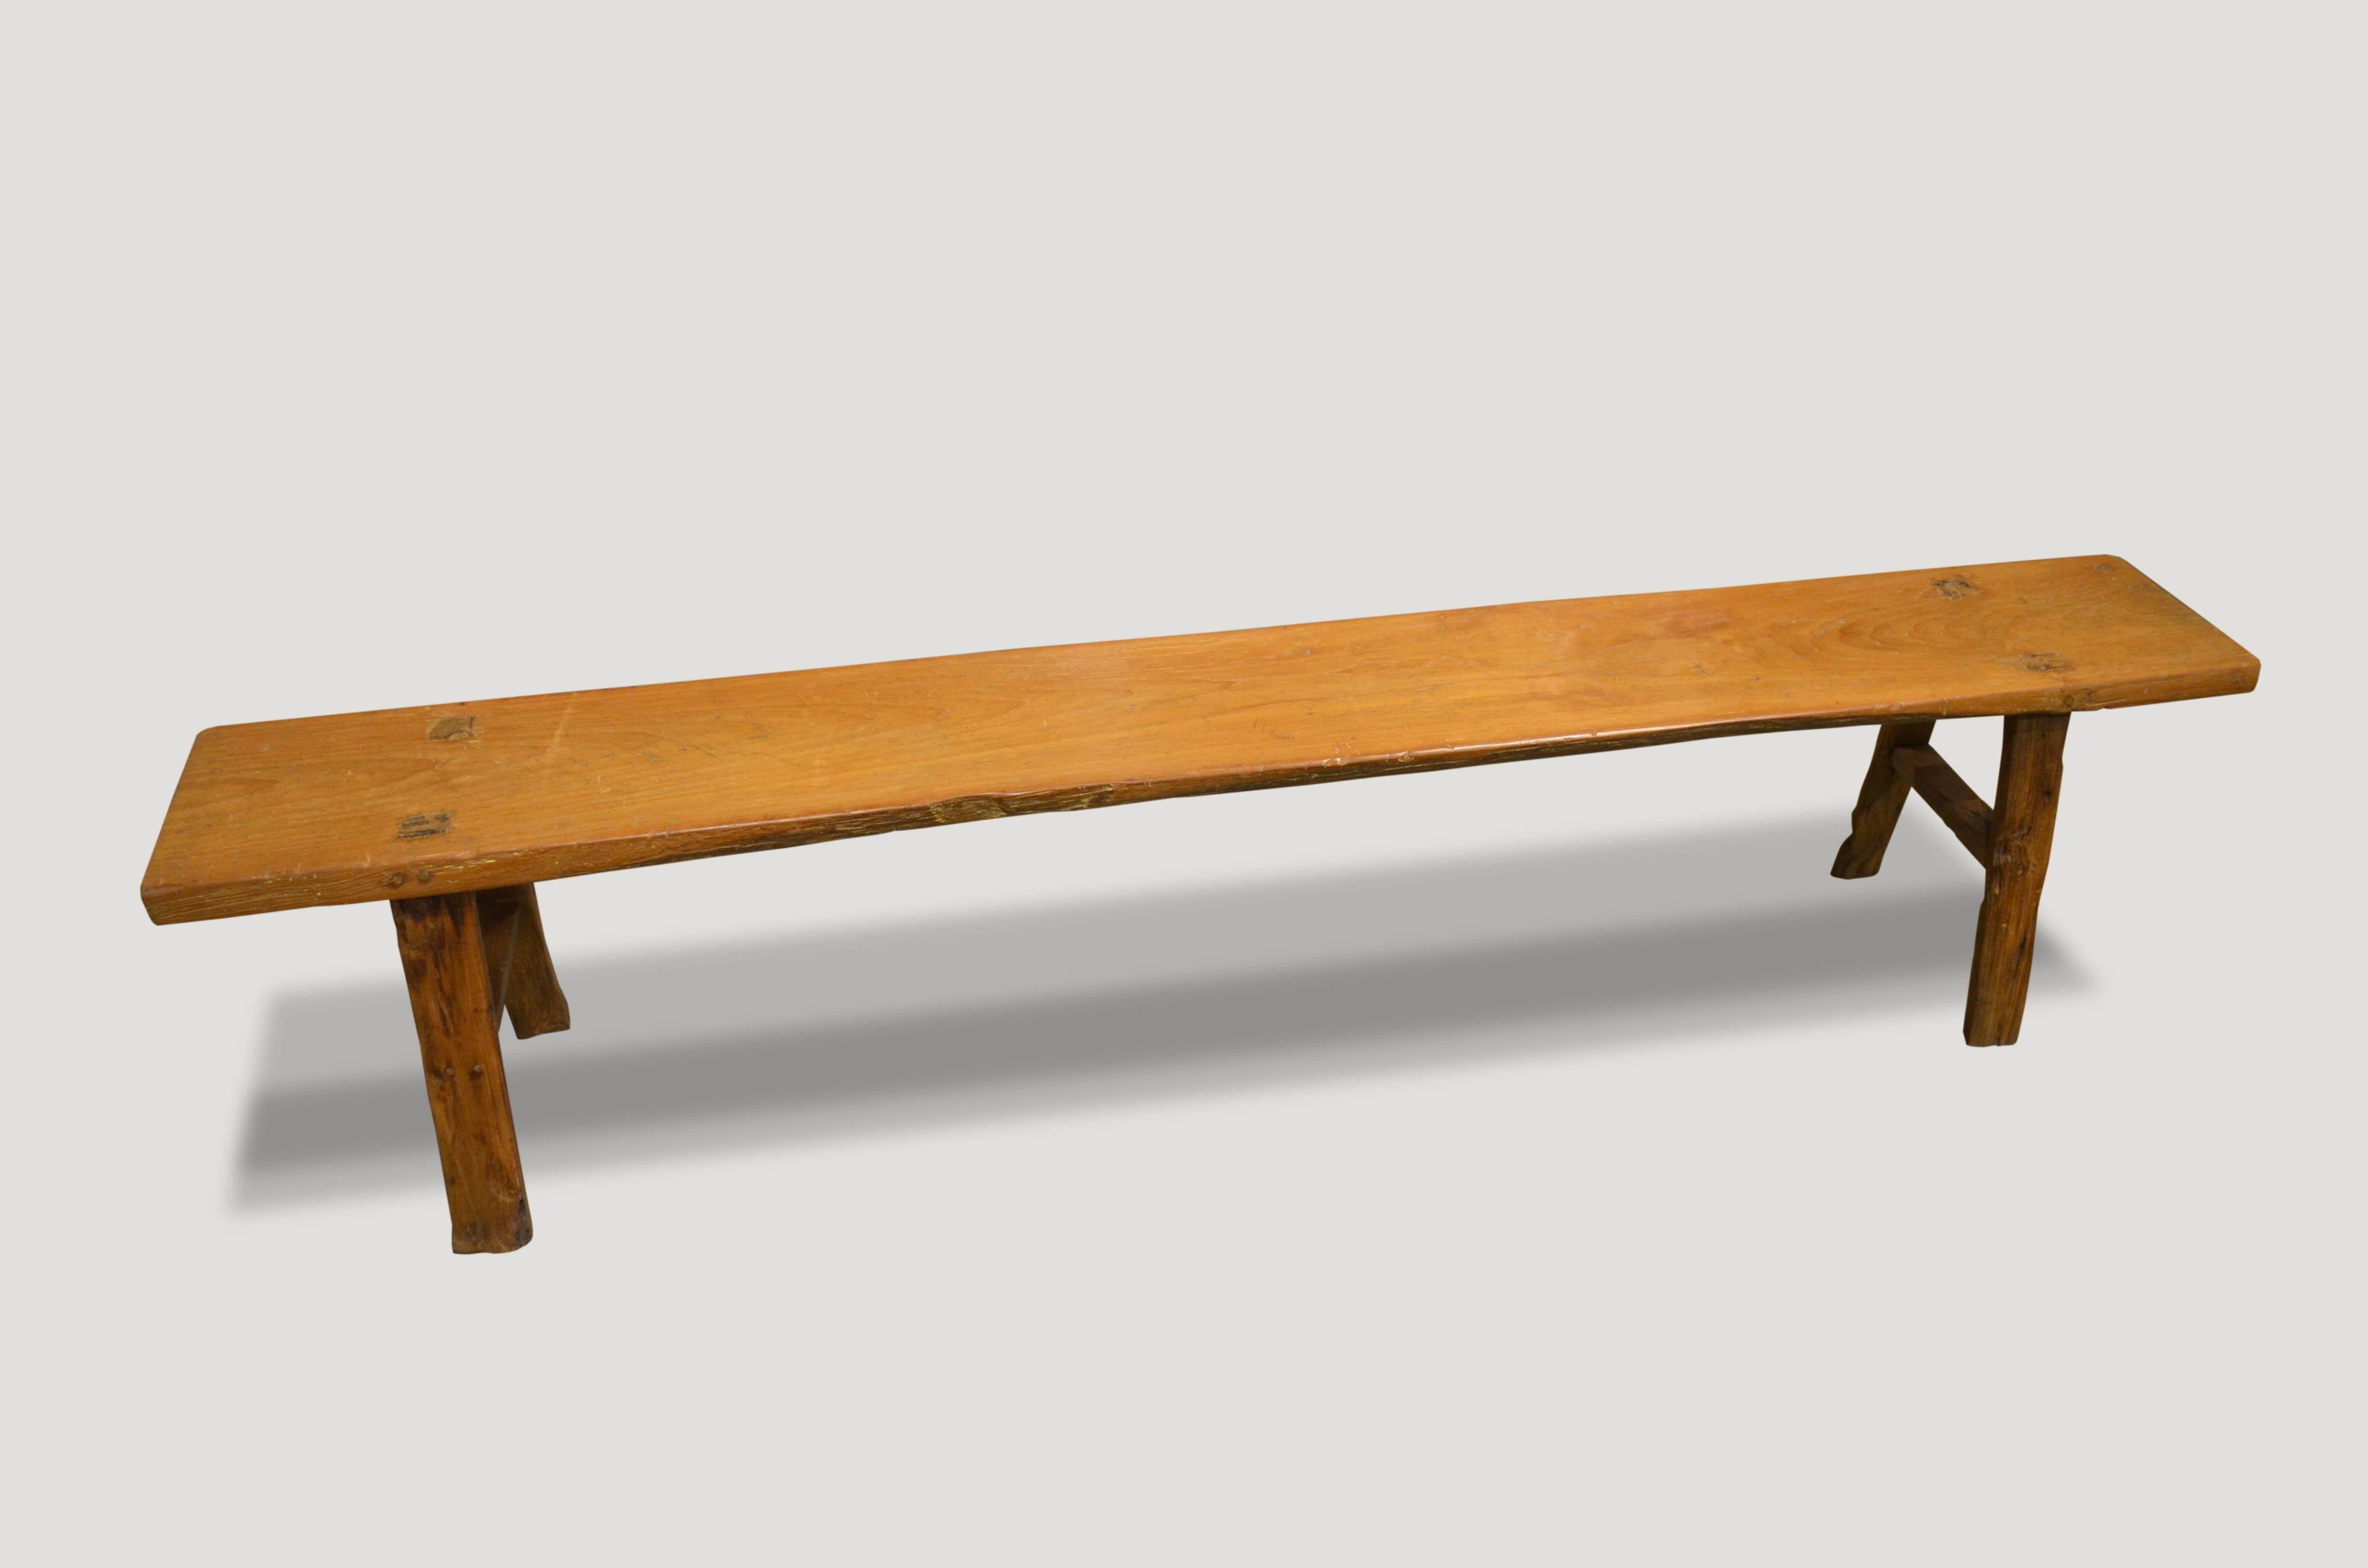 Antique single slab teak wood bench or coffee table. Can also be used as a shelf.

This bench was sourced in the spirit of Wabi-sabi, a Japanese philosophy that beauty can be found in imperfection and impermanence. It’s a beauty of things modest and